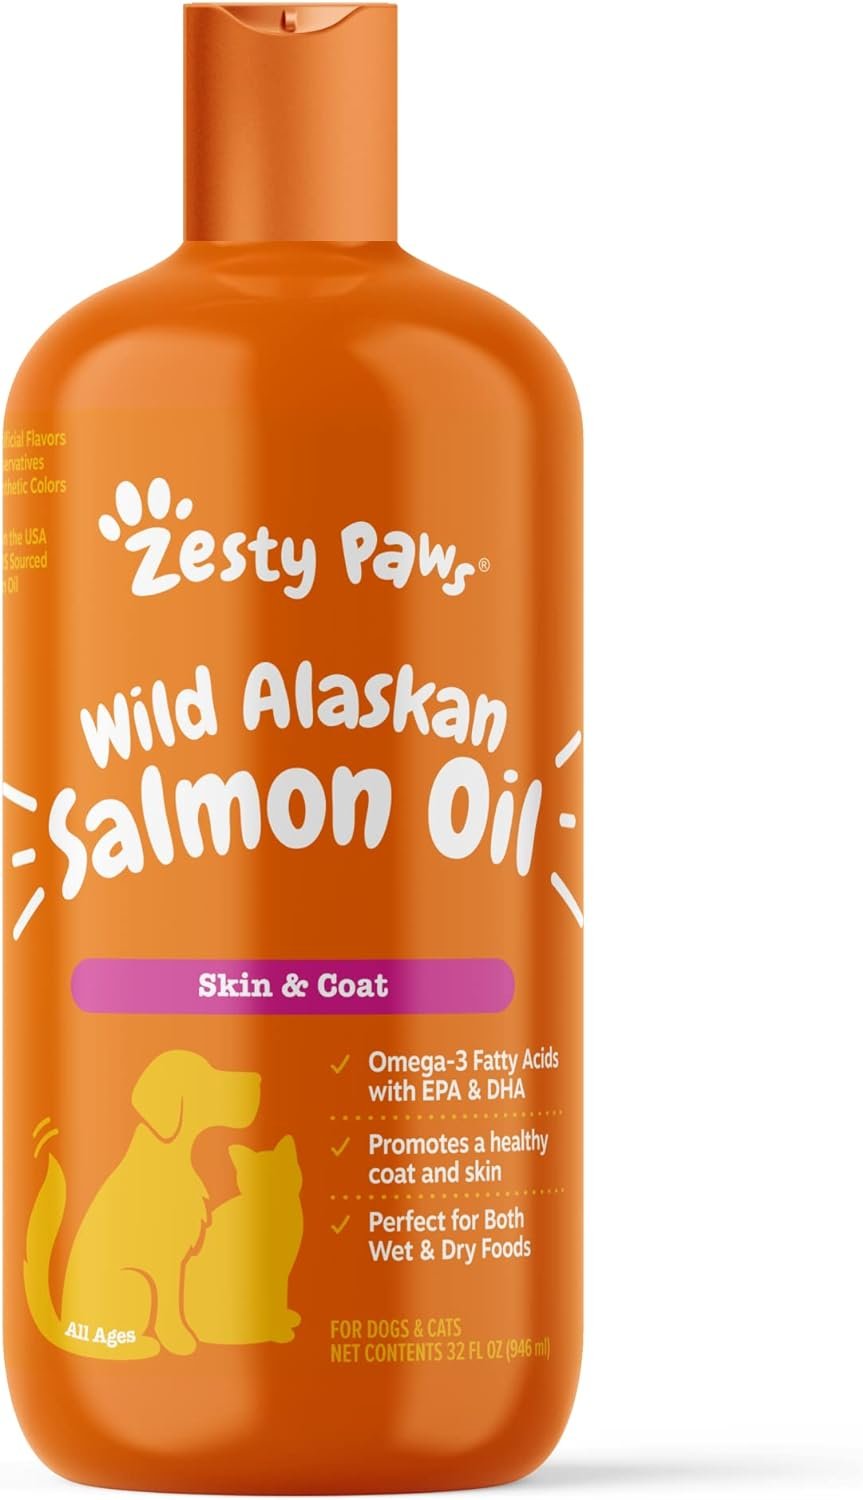 Pure Wild Alaskan Salmon Oil for Dogs  Cats - Omega 3 Skin  Coat Support - Liquid Food Supplement for Pets - Natural EPA + DHA Fatty Acids for Joint Function, Immune  Heart Health, 32 Fl Oz